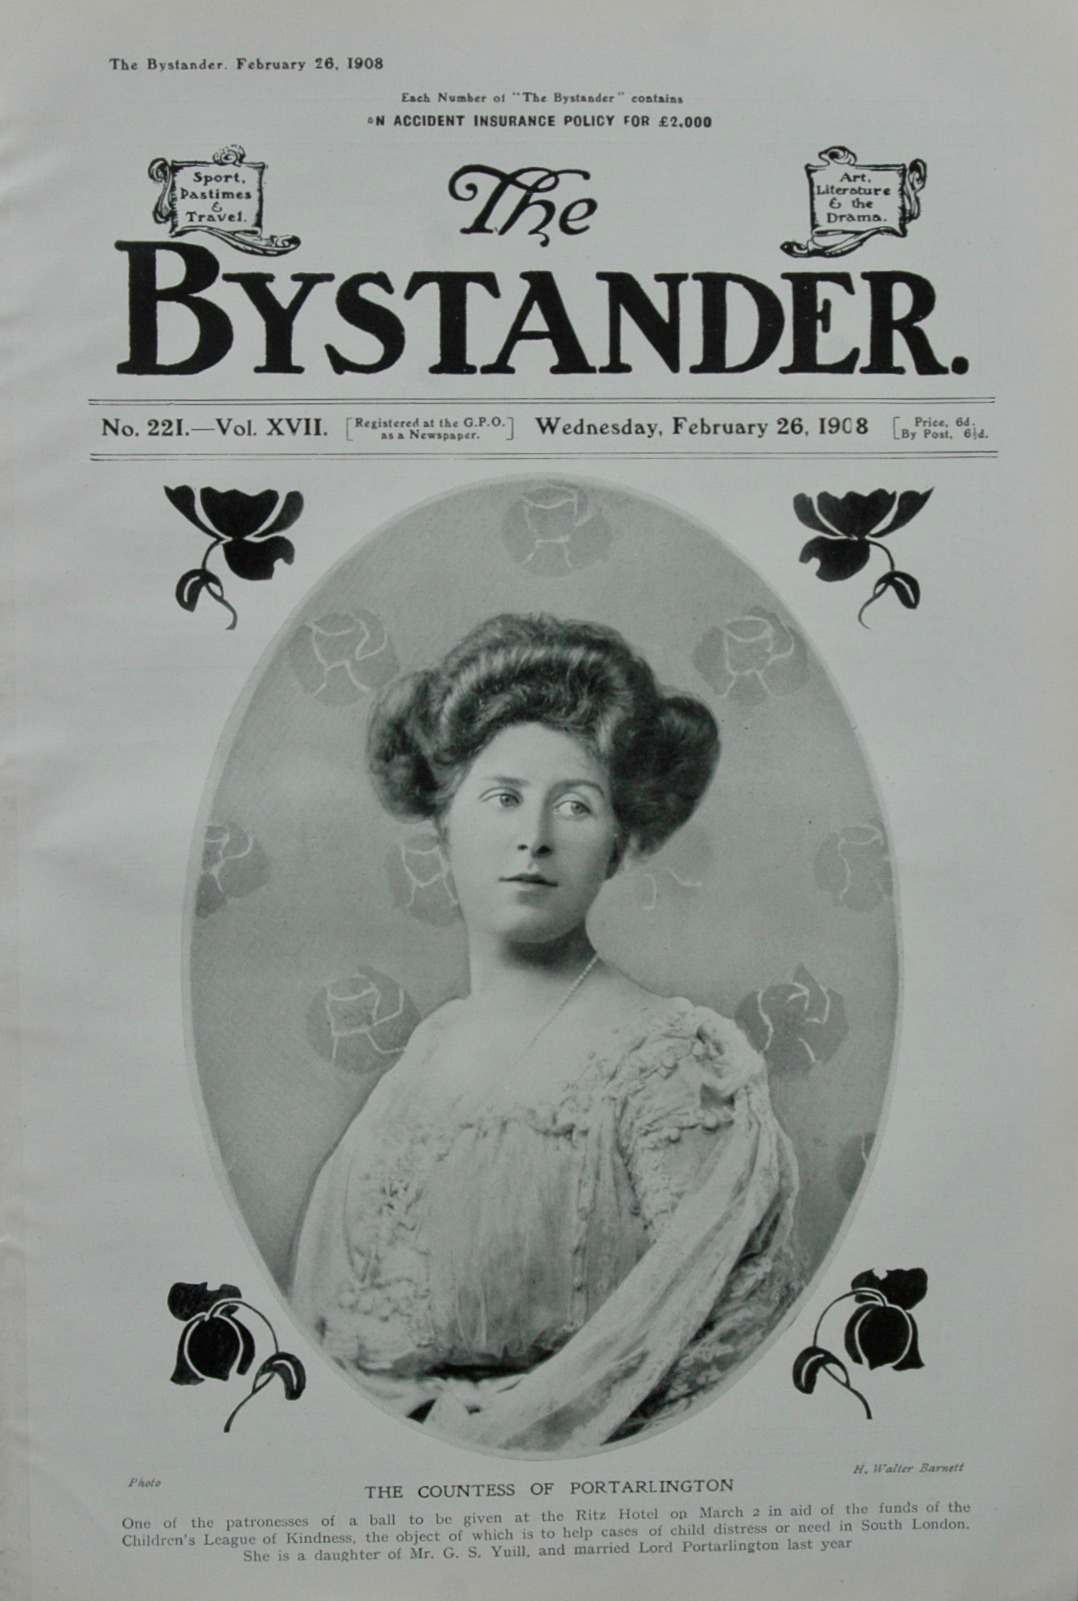 The Bystander, February 26, 1908